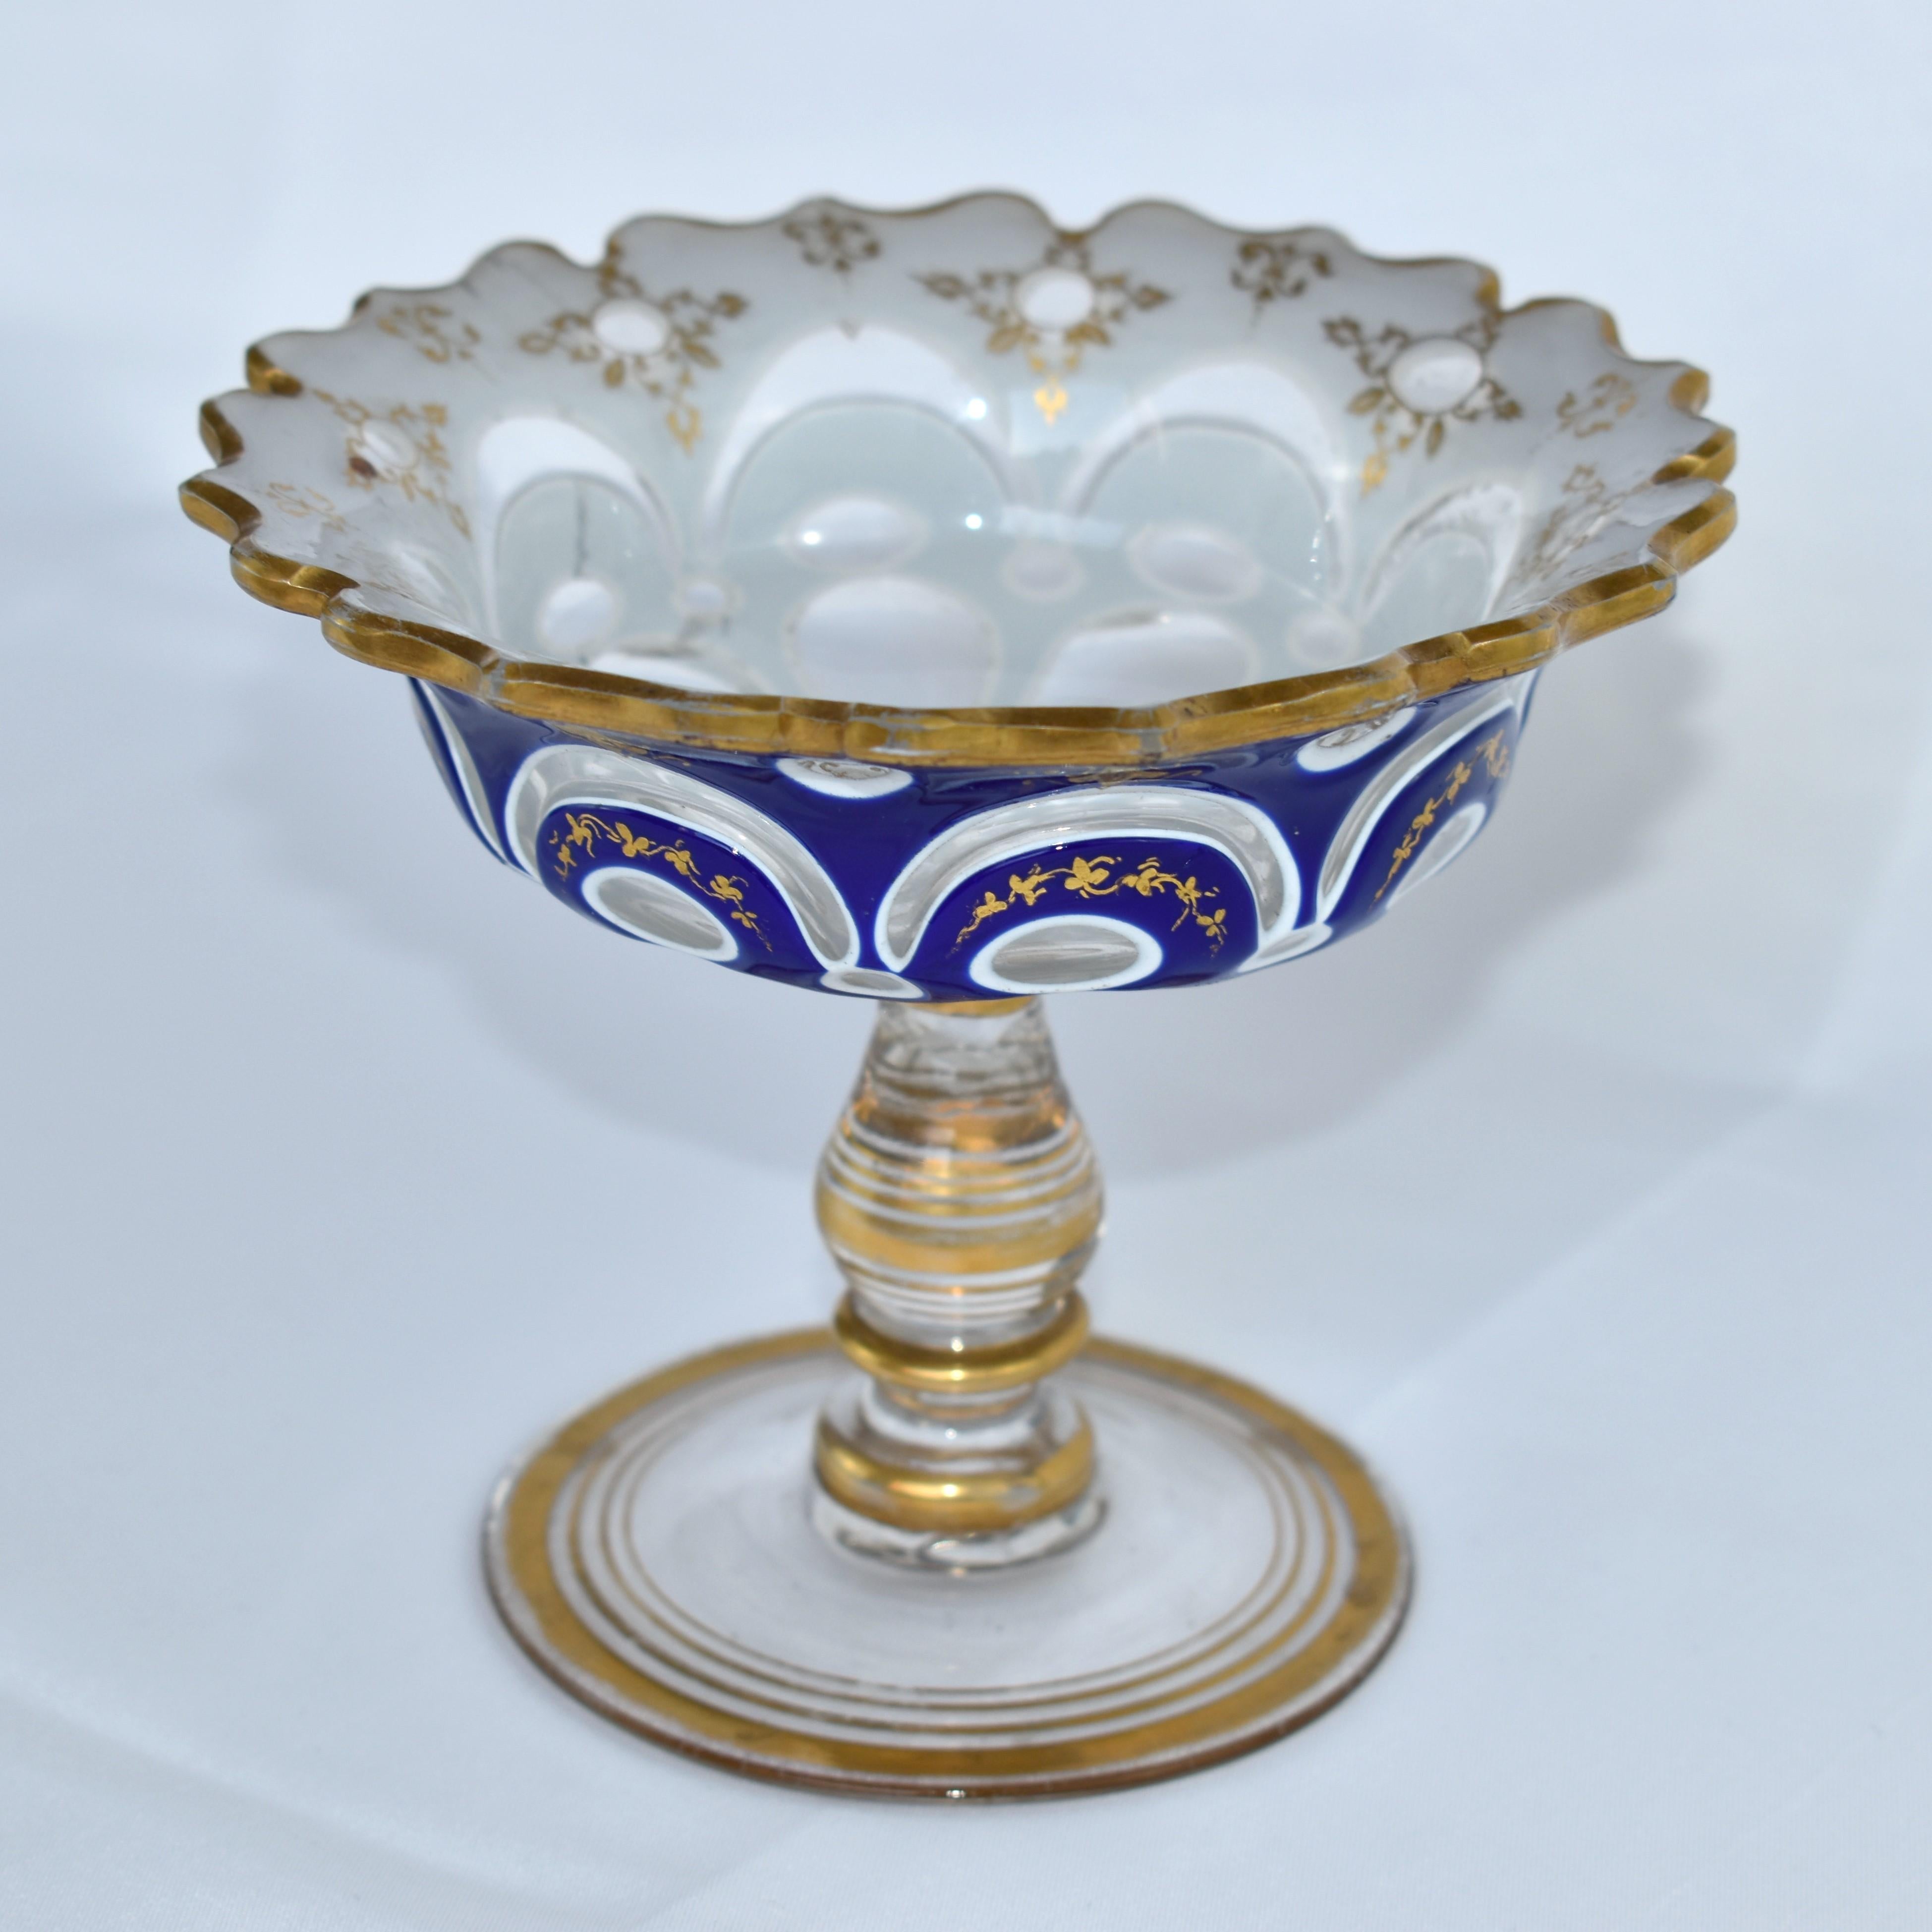 Gilt ANTIQUE BOHEMIAN MOSER OVERLAY GLASS TAZZA BOWL, 19th CENTURY For Sale